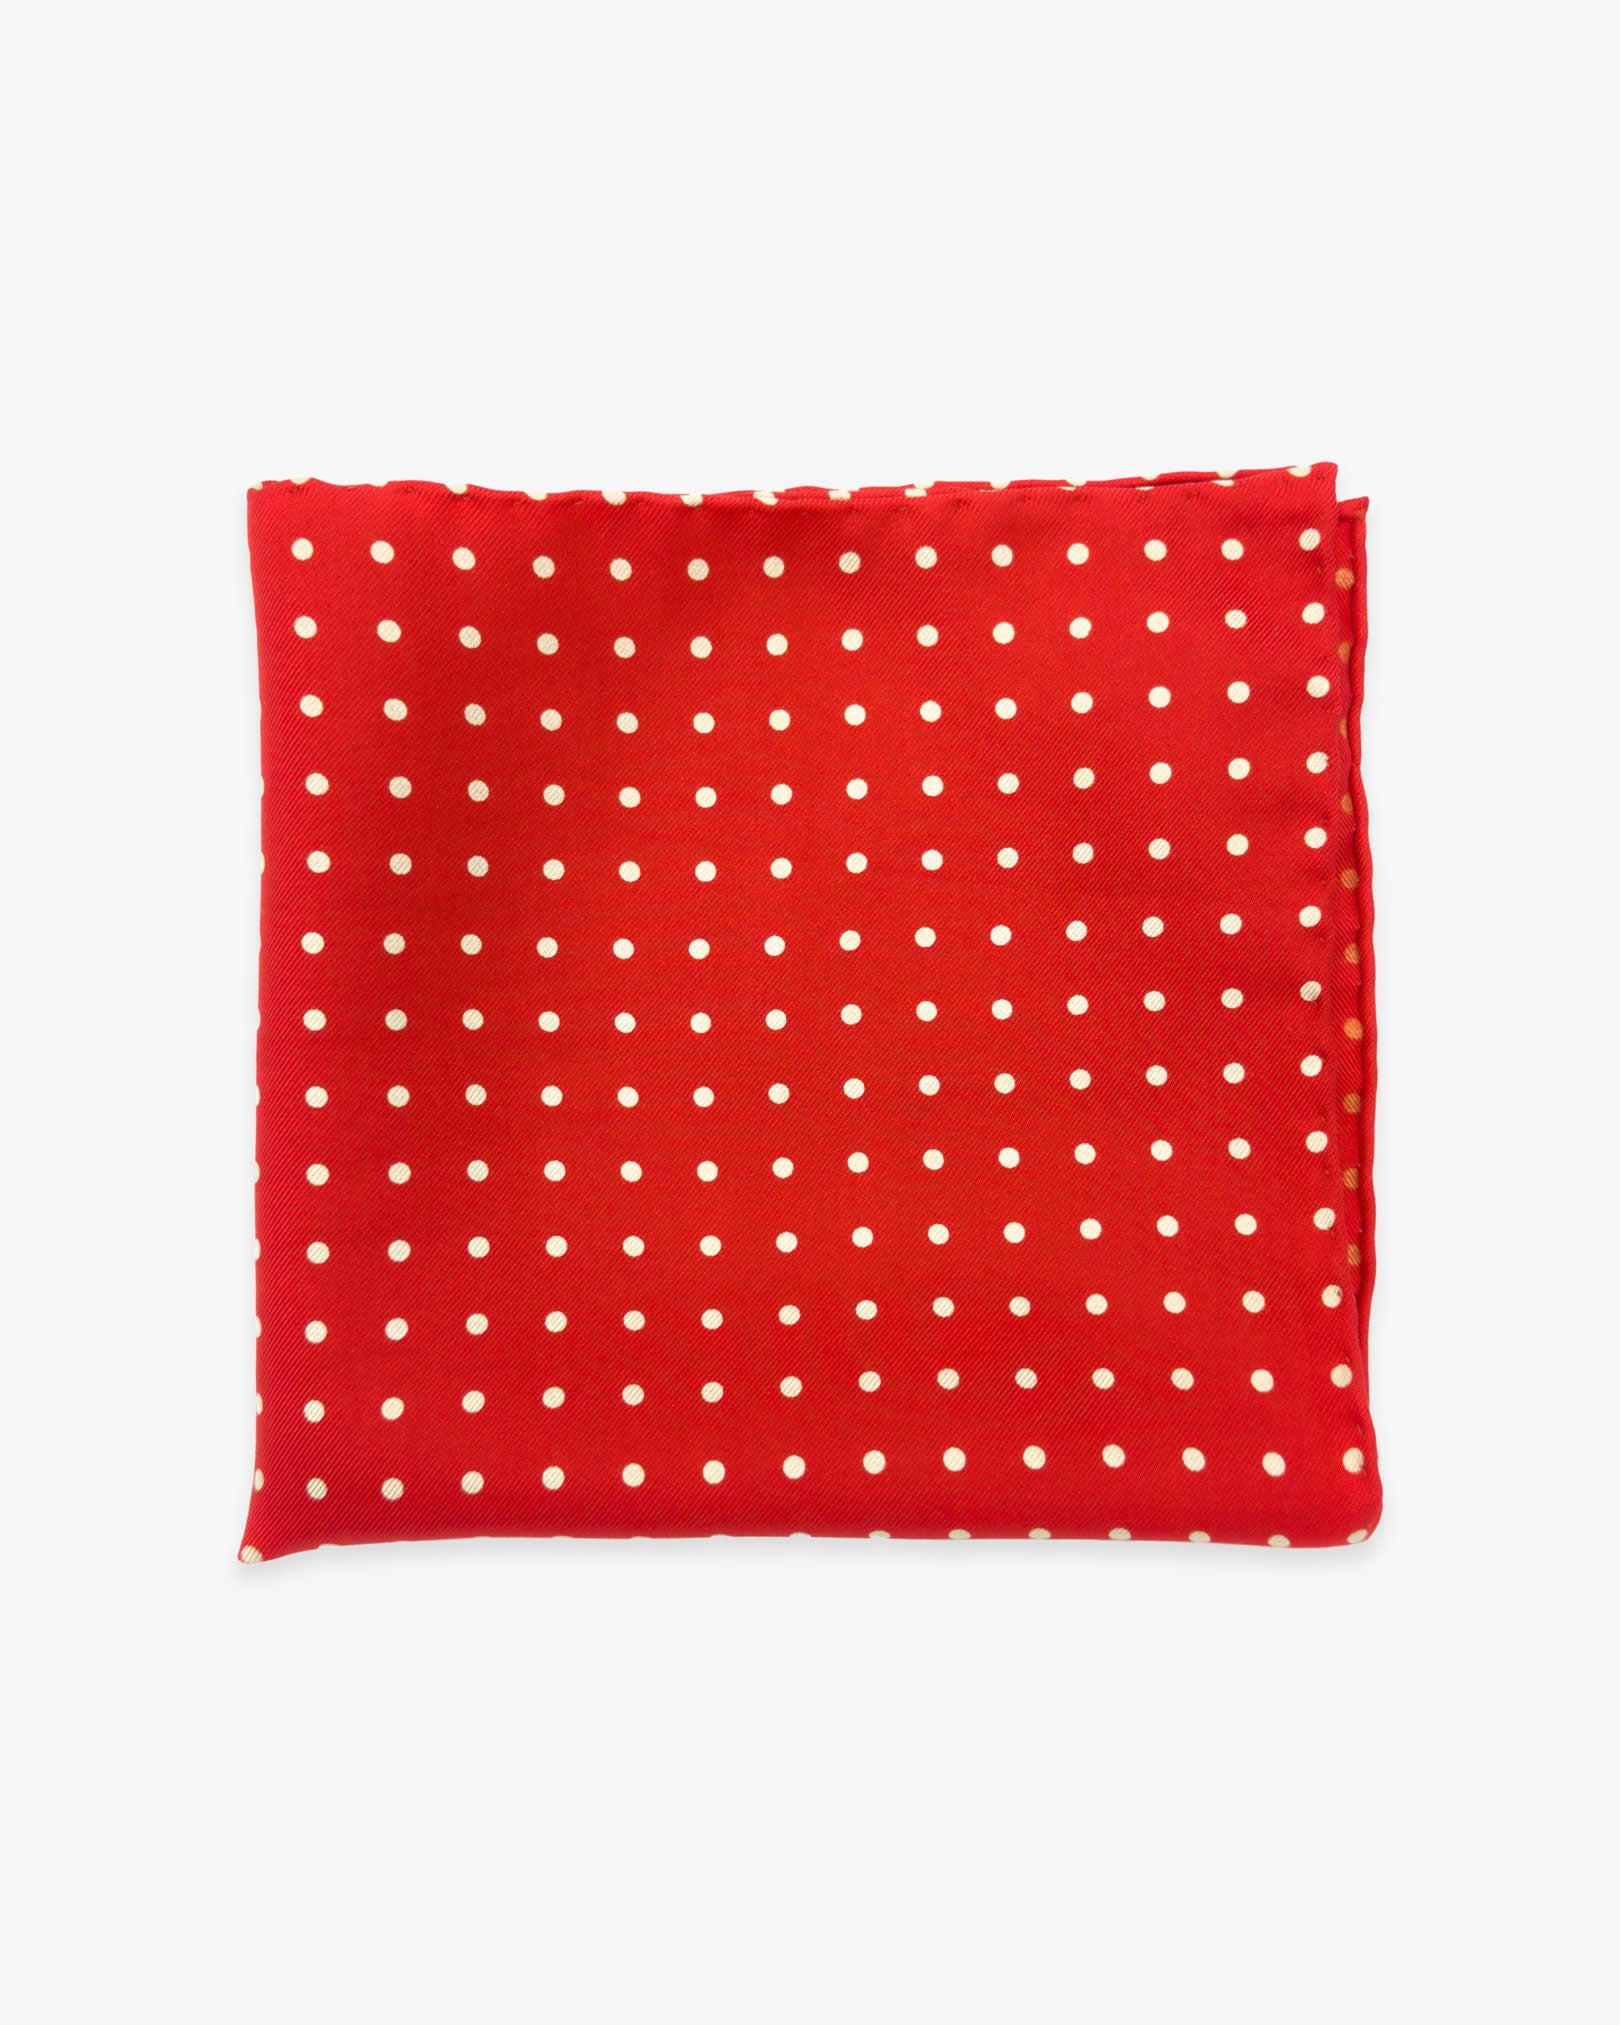 The 'Hastings' silk pocket square from SOHO Scarves UK collection. Folded into a quarter, showing the white polka dots against a bright red background.